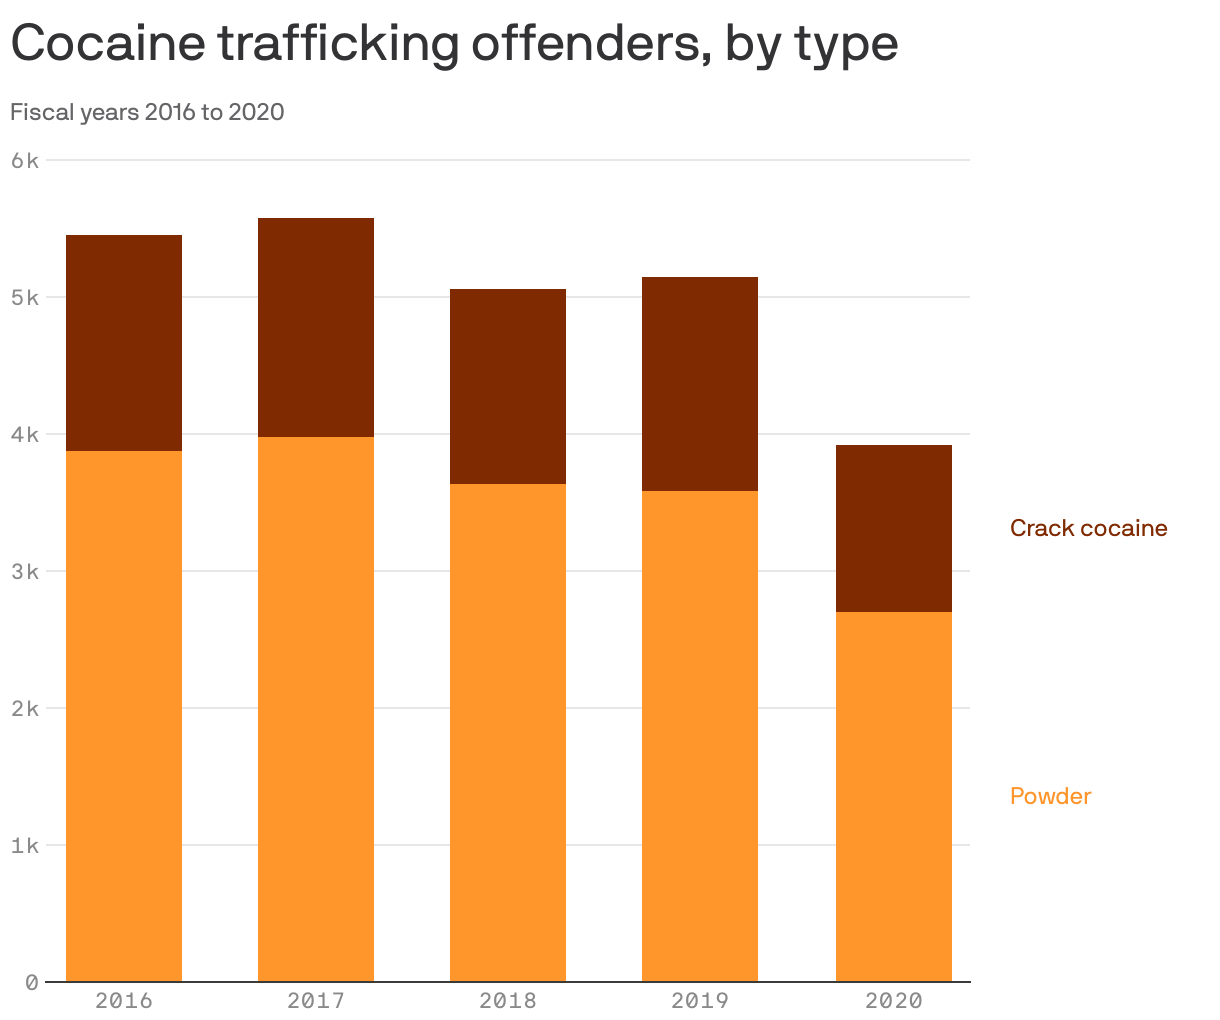 Cocaine trafficking offenders, by type